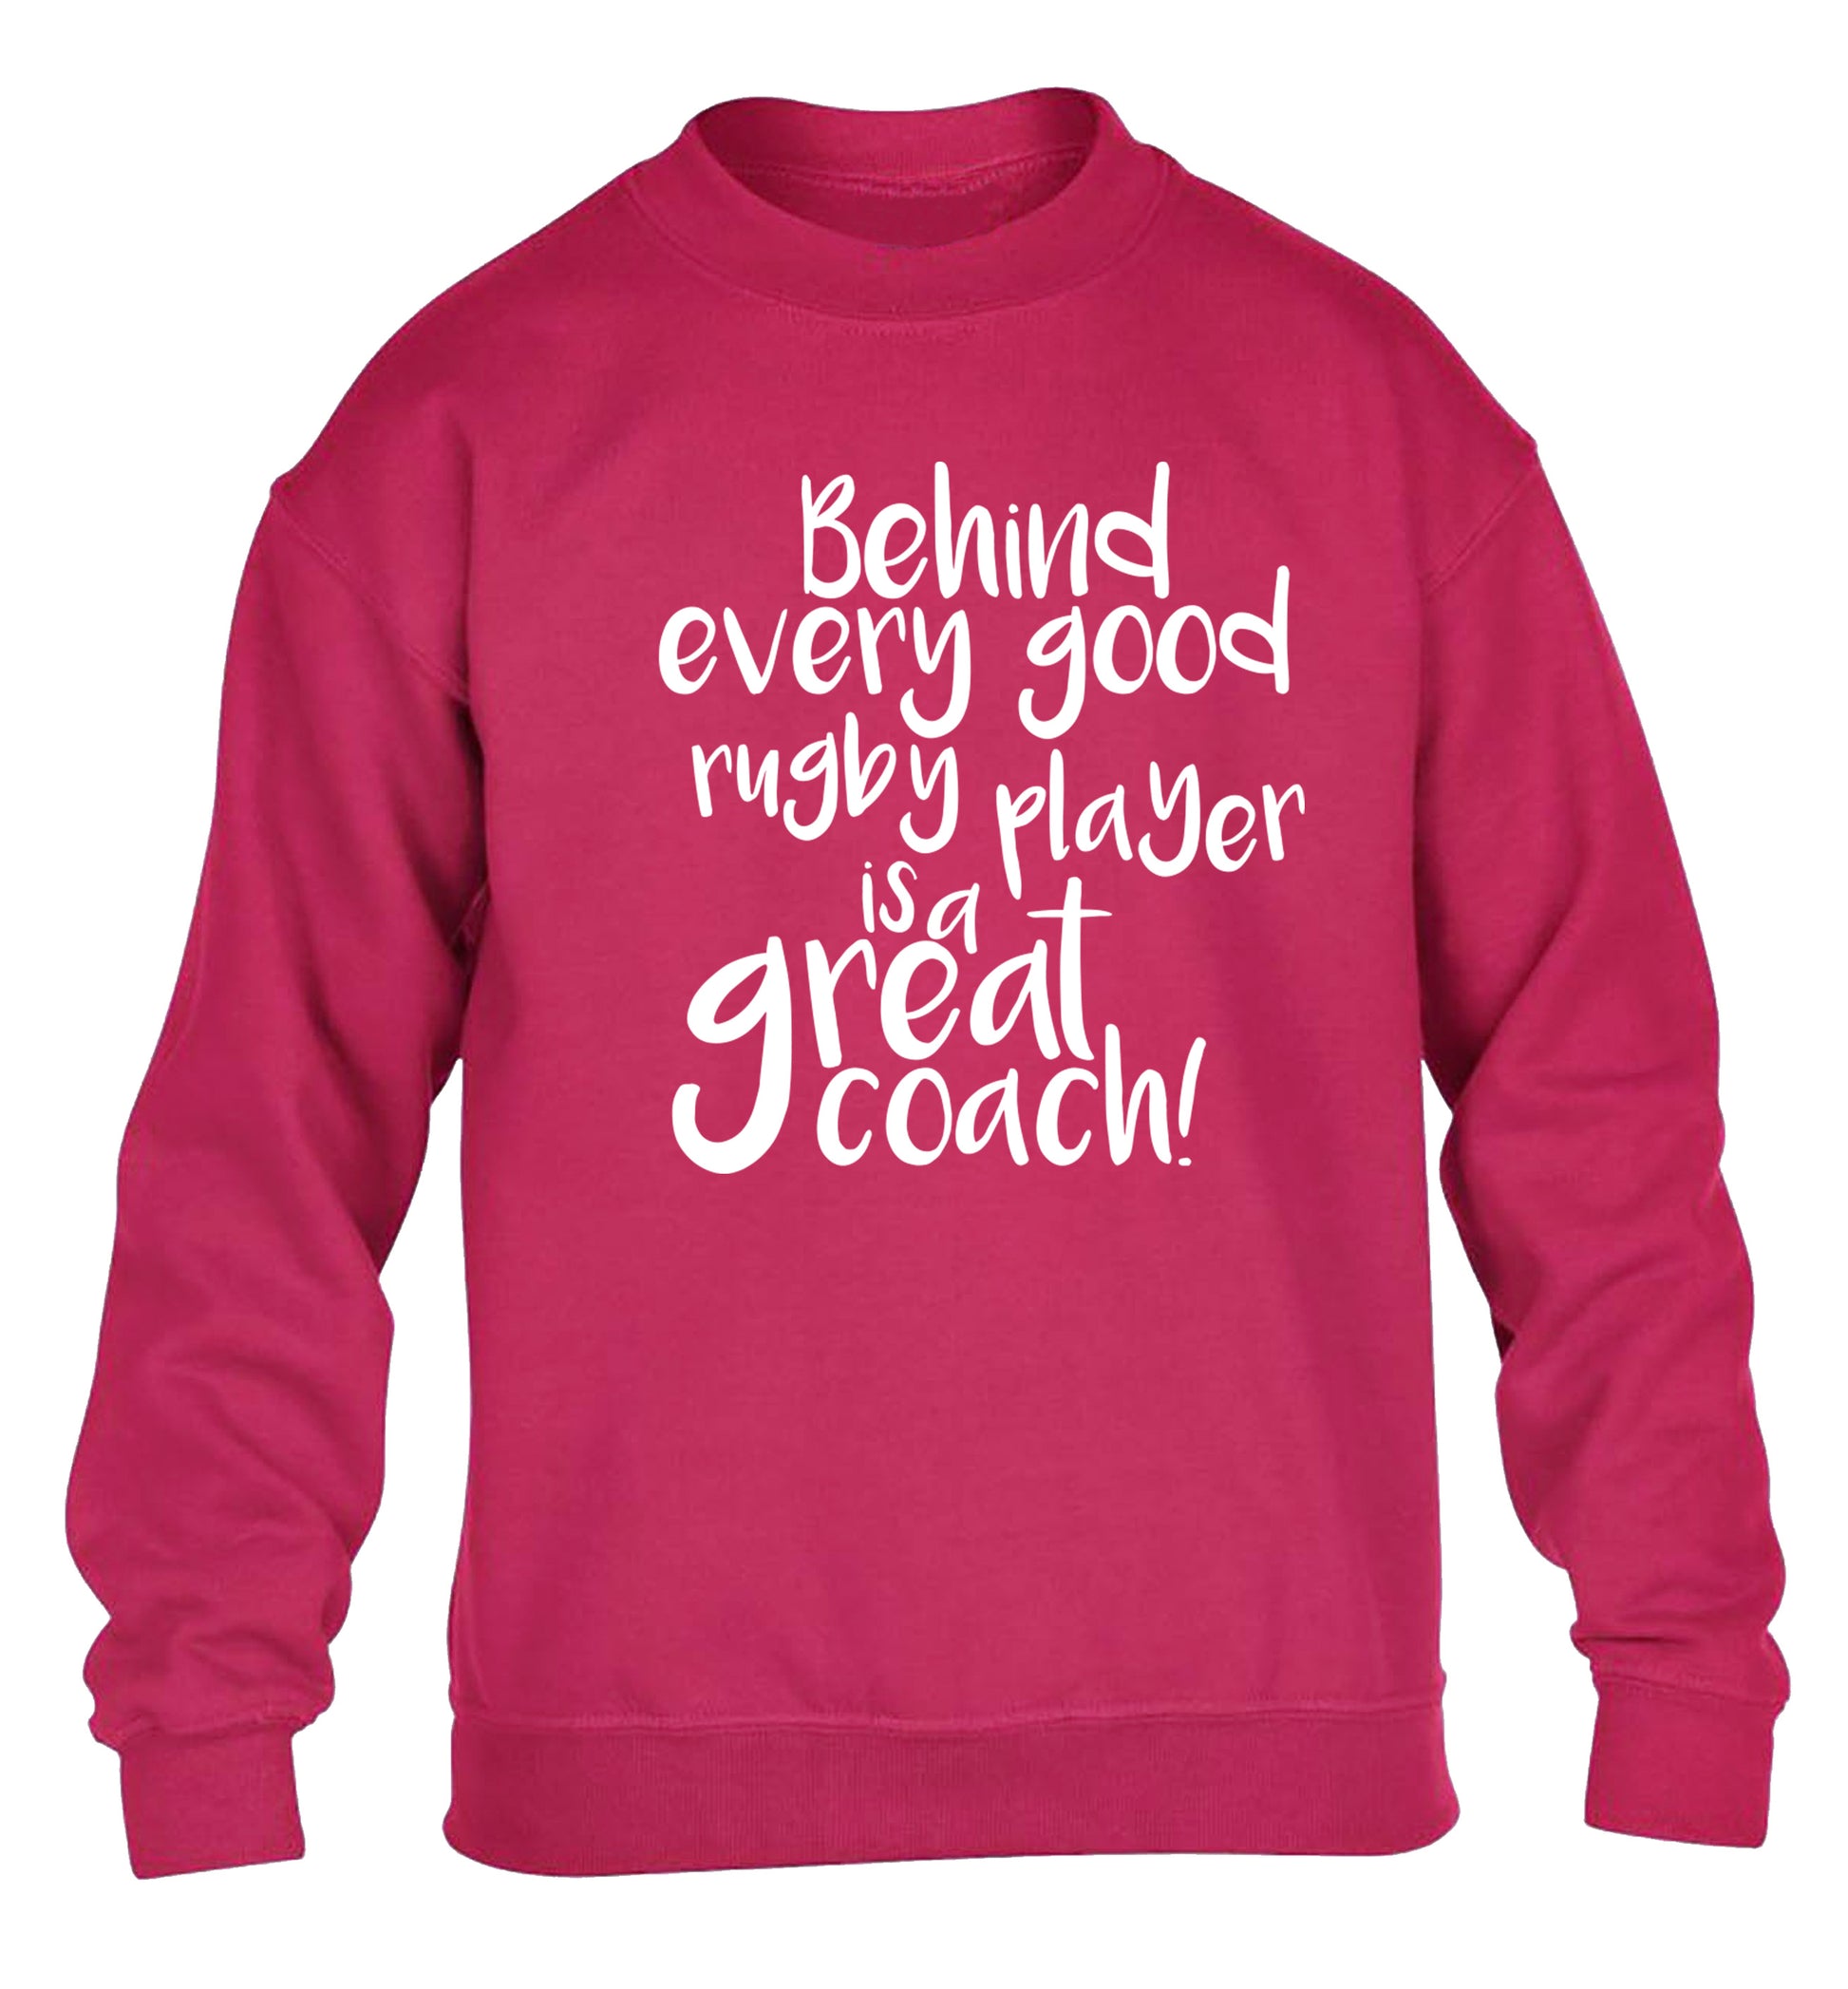 Behind every goor rugby player is a great coach children's pink sweater 12-13 Years